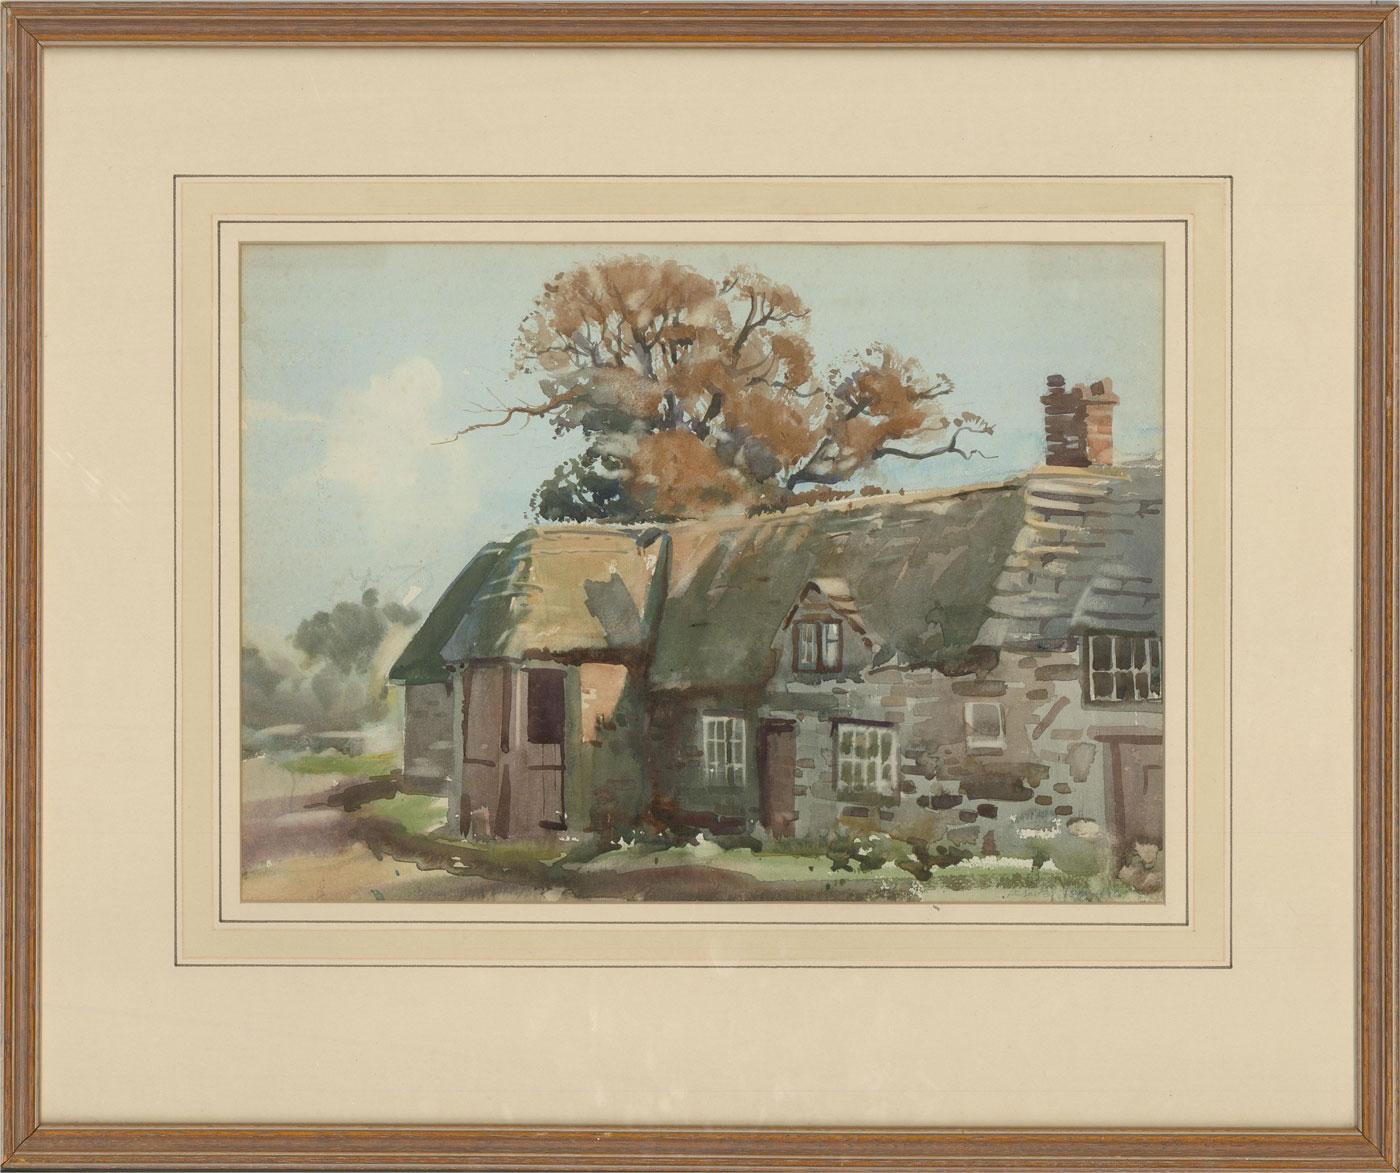 A delightful watercolour painting by the artist Arthur Royce Bradbury ARWA, depicting a deserted farmhouse in Dorset. Signed to the lower margin. Title and date to the lower right-hand corner. Well-presented in a washline card mount and in a thin